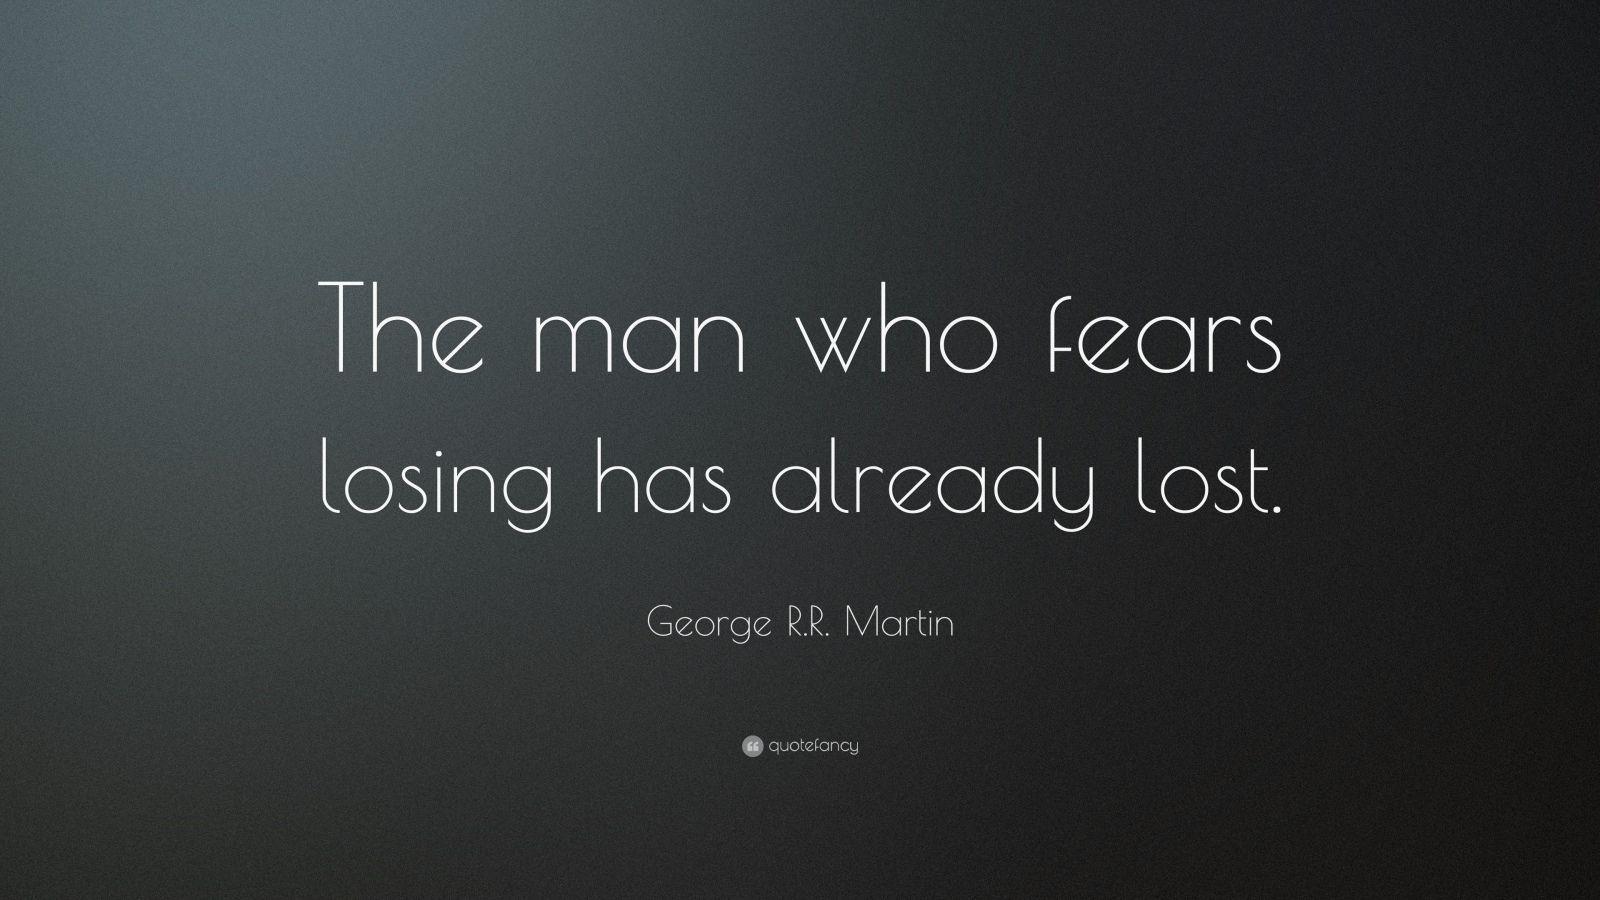 George R.R. Martin Quotes (100 wallpaper)